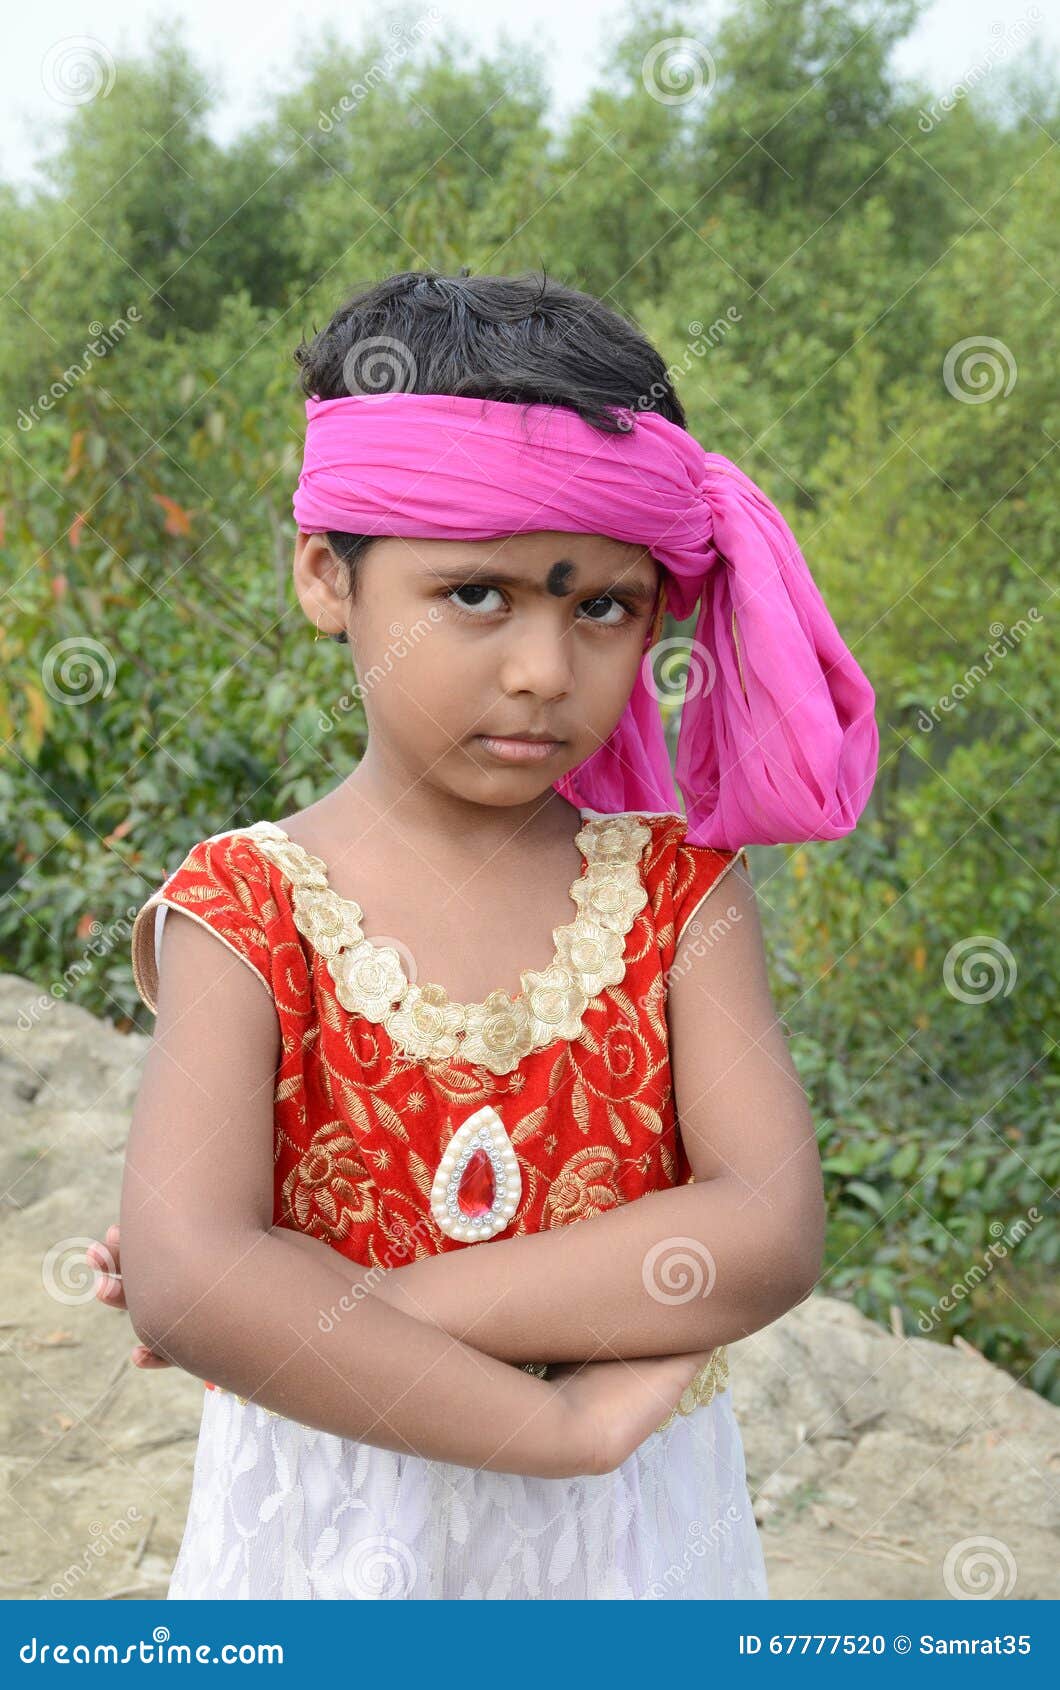 Funny Look stock photo. Image of cute, little, portrait - 67777520